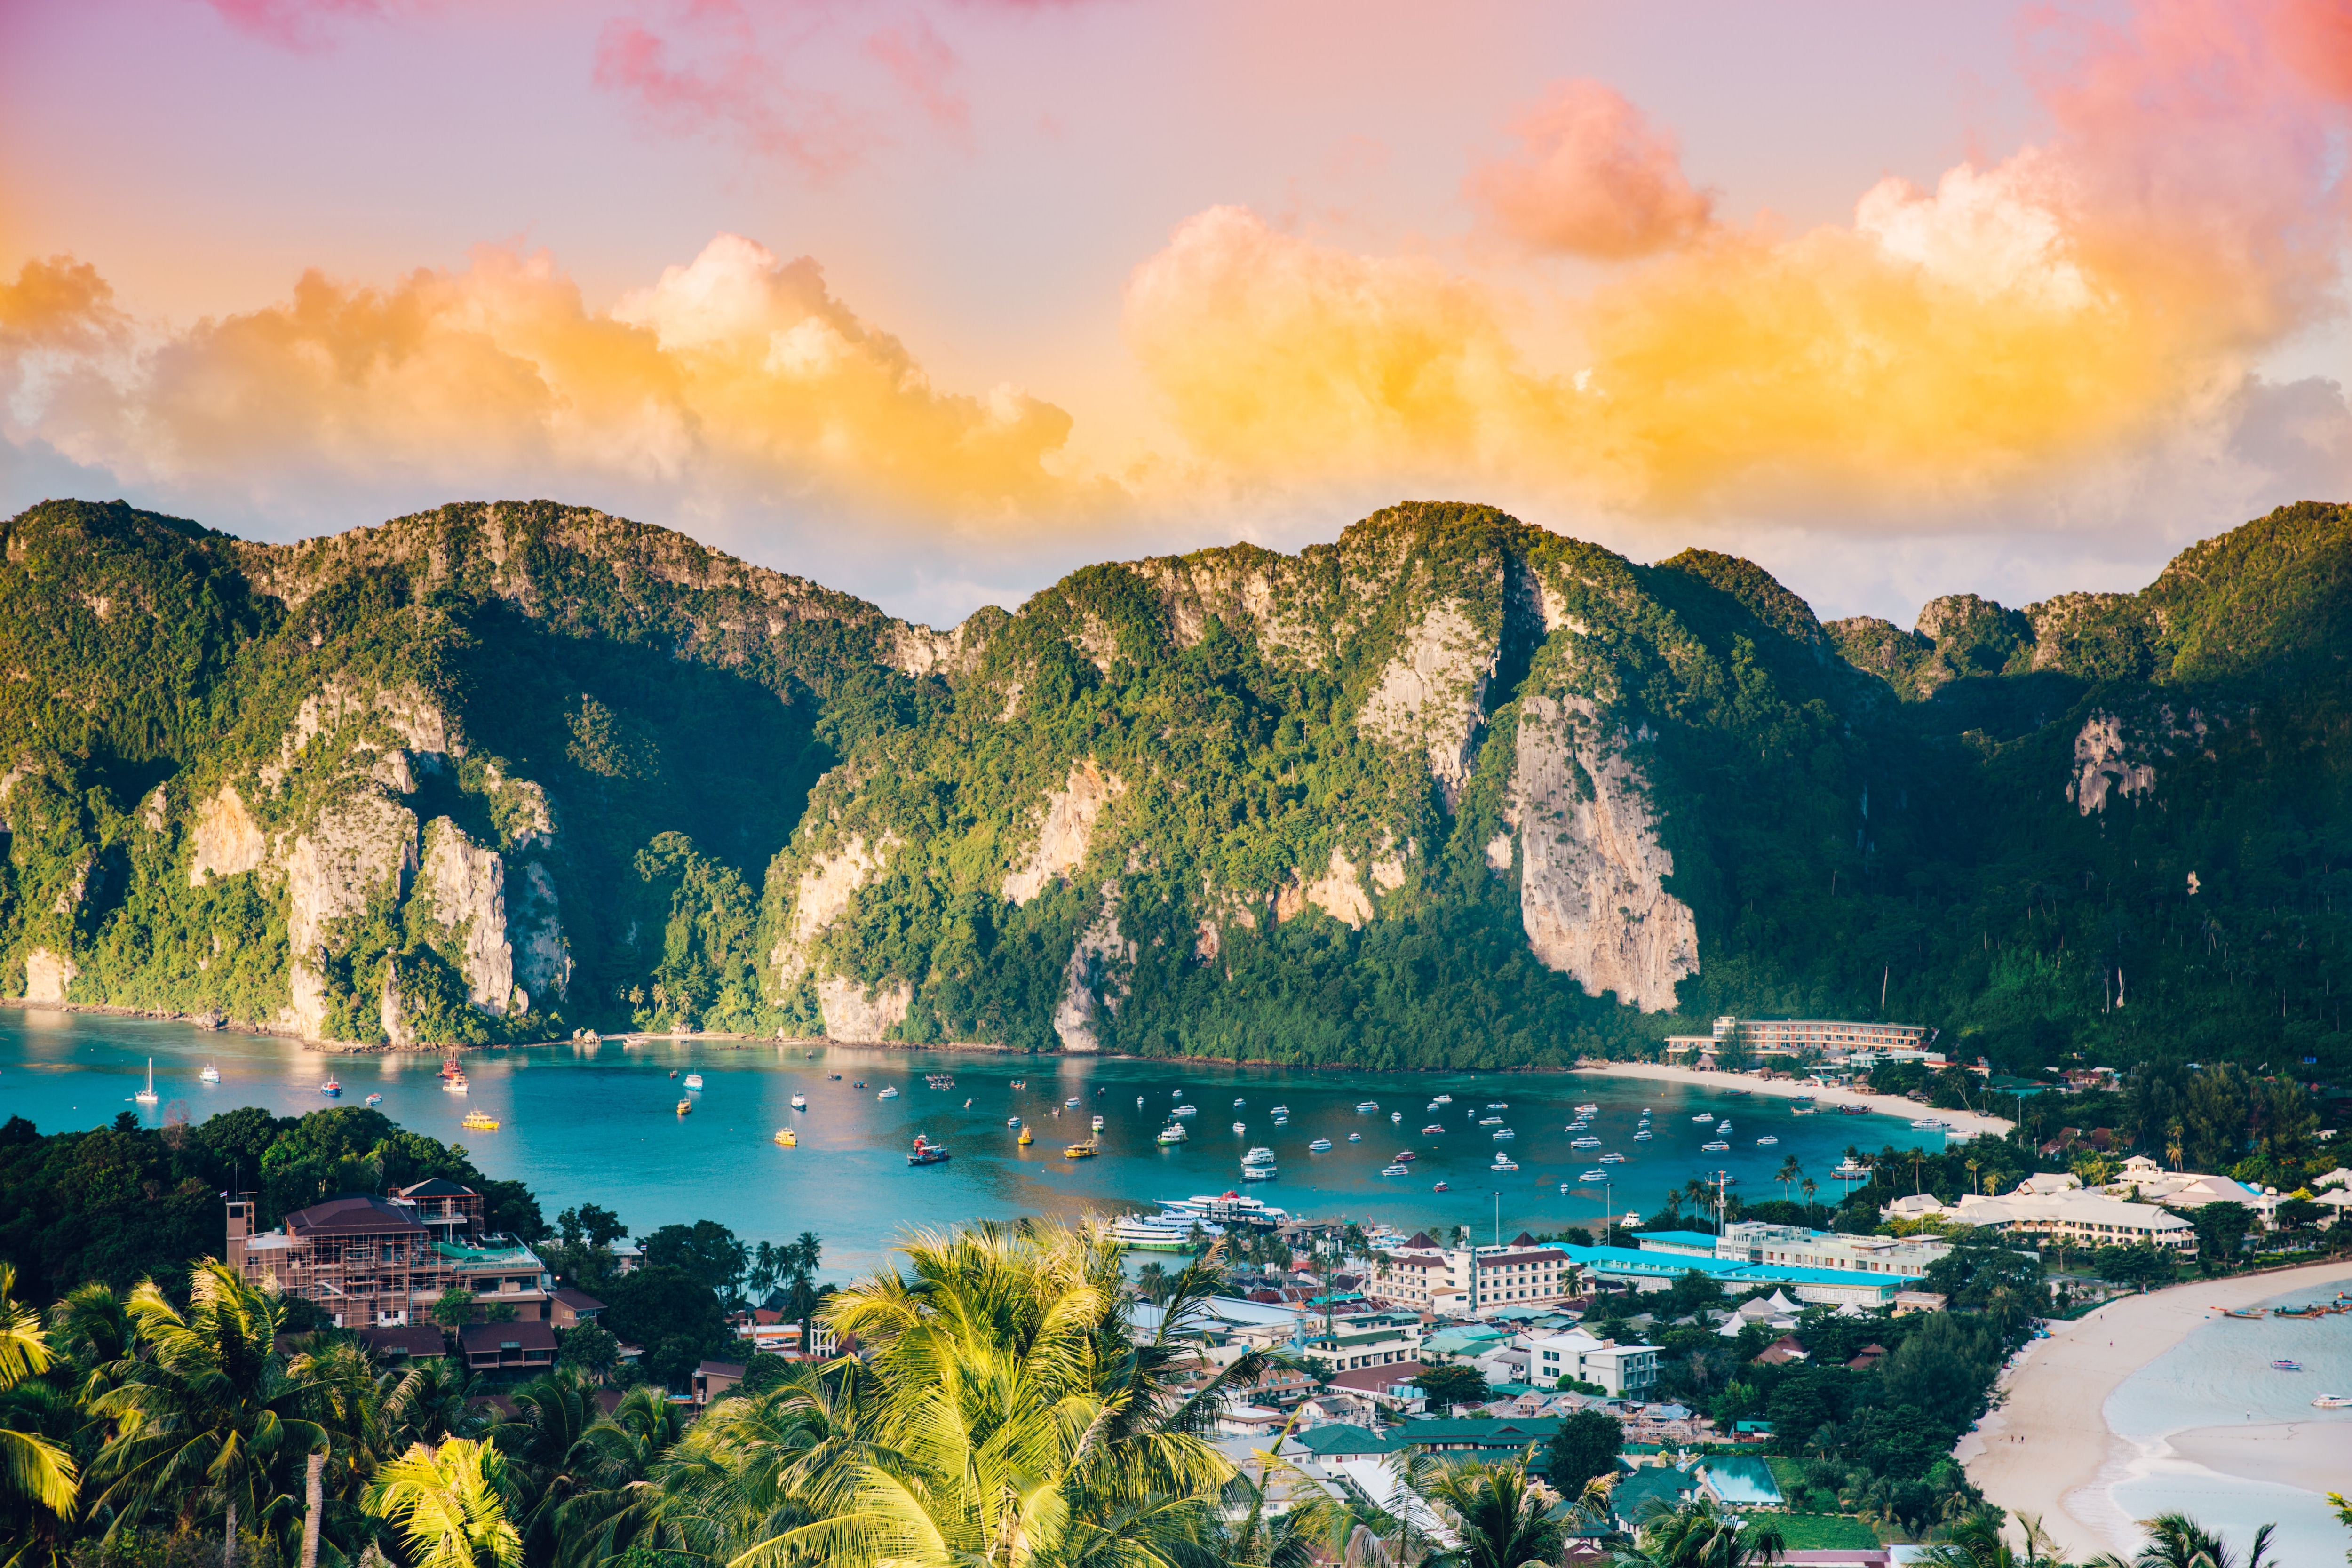 Indian nationals are granted a 15-day visa upon arrival in Thailand.(Unsplash)